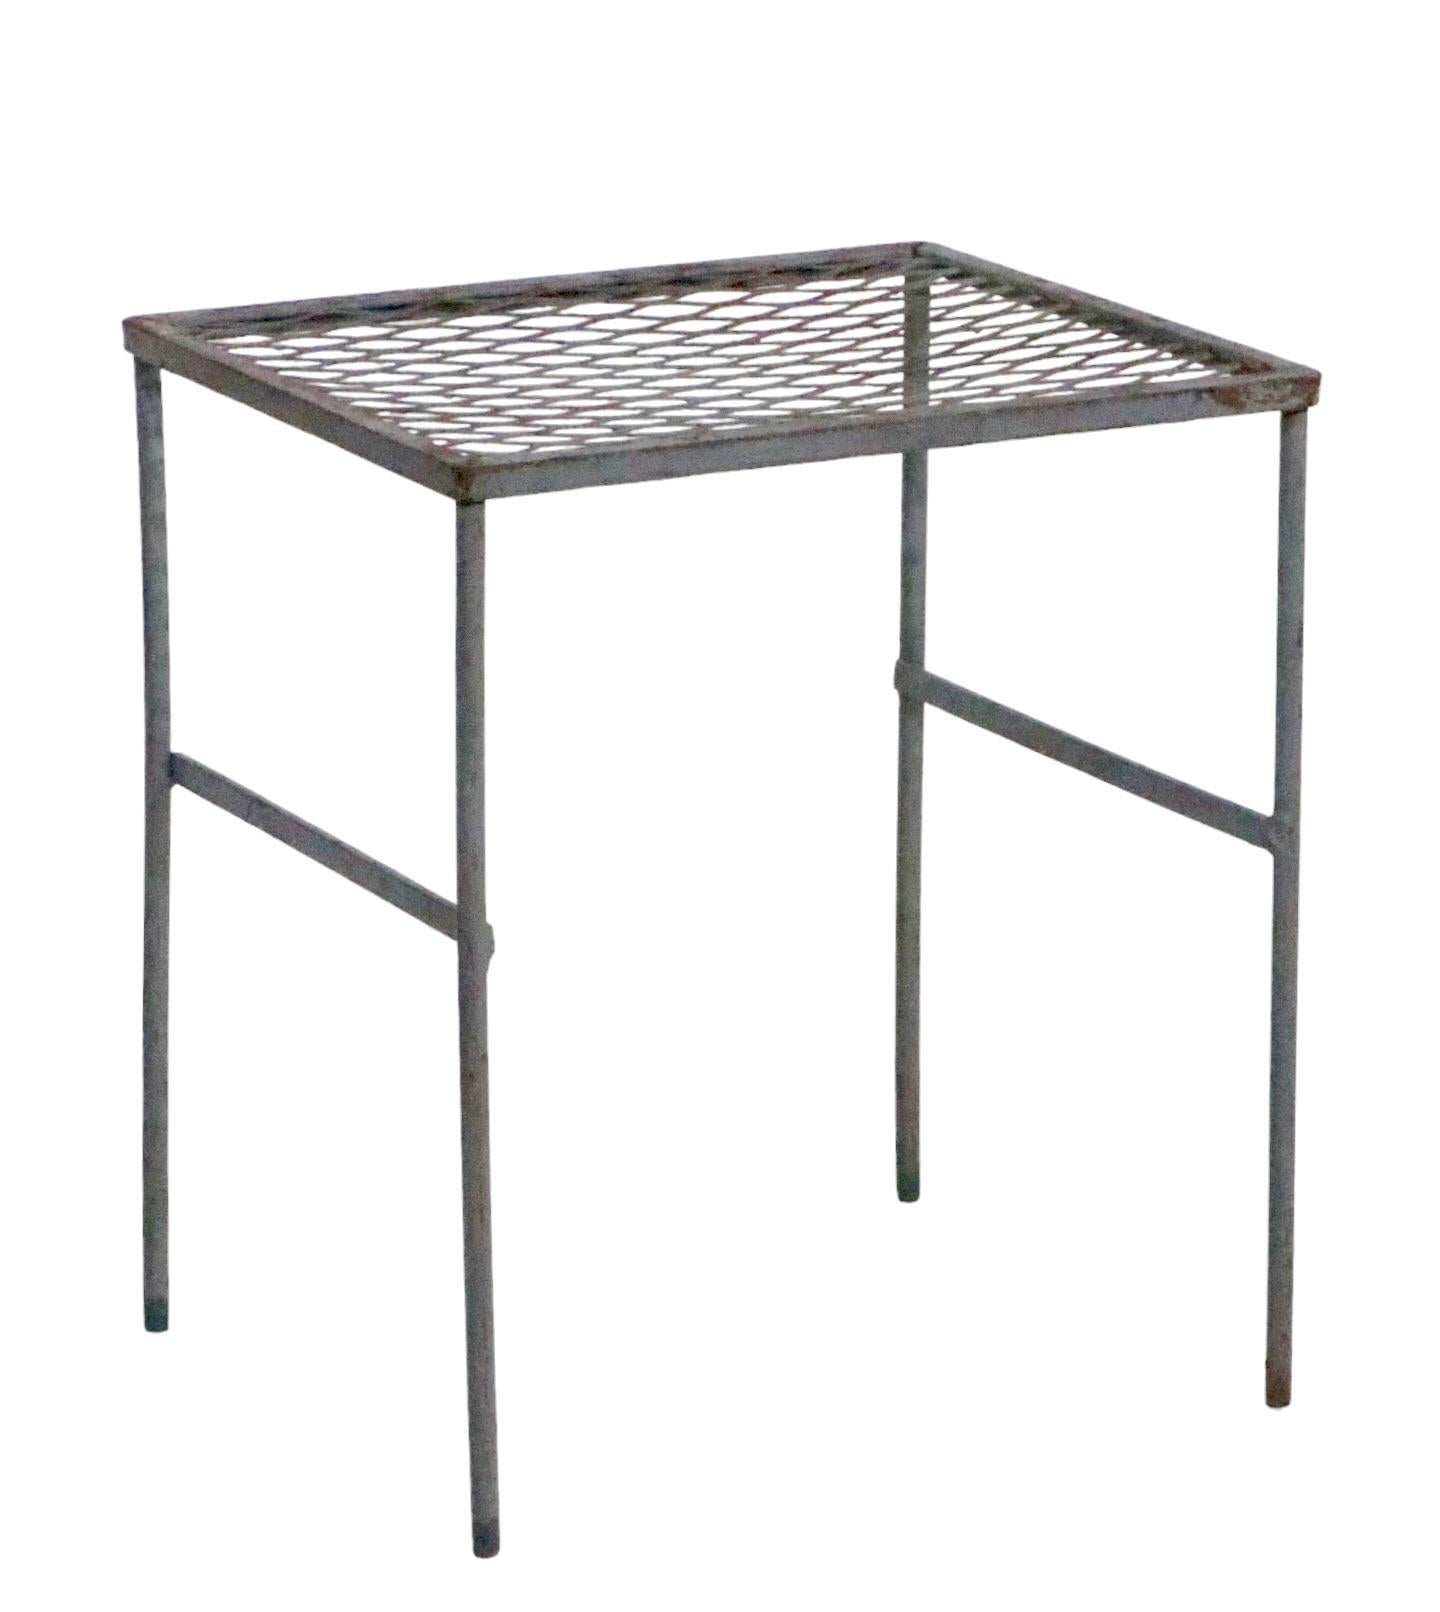 Architectural side, end table having a wrought iron base, with a metal mesh top. The table is in very good original condition, clean and ready to use, it is in grey paint finish. Manufacture attributed to Salterini, in the style of Woodard.